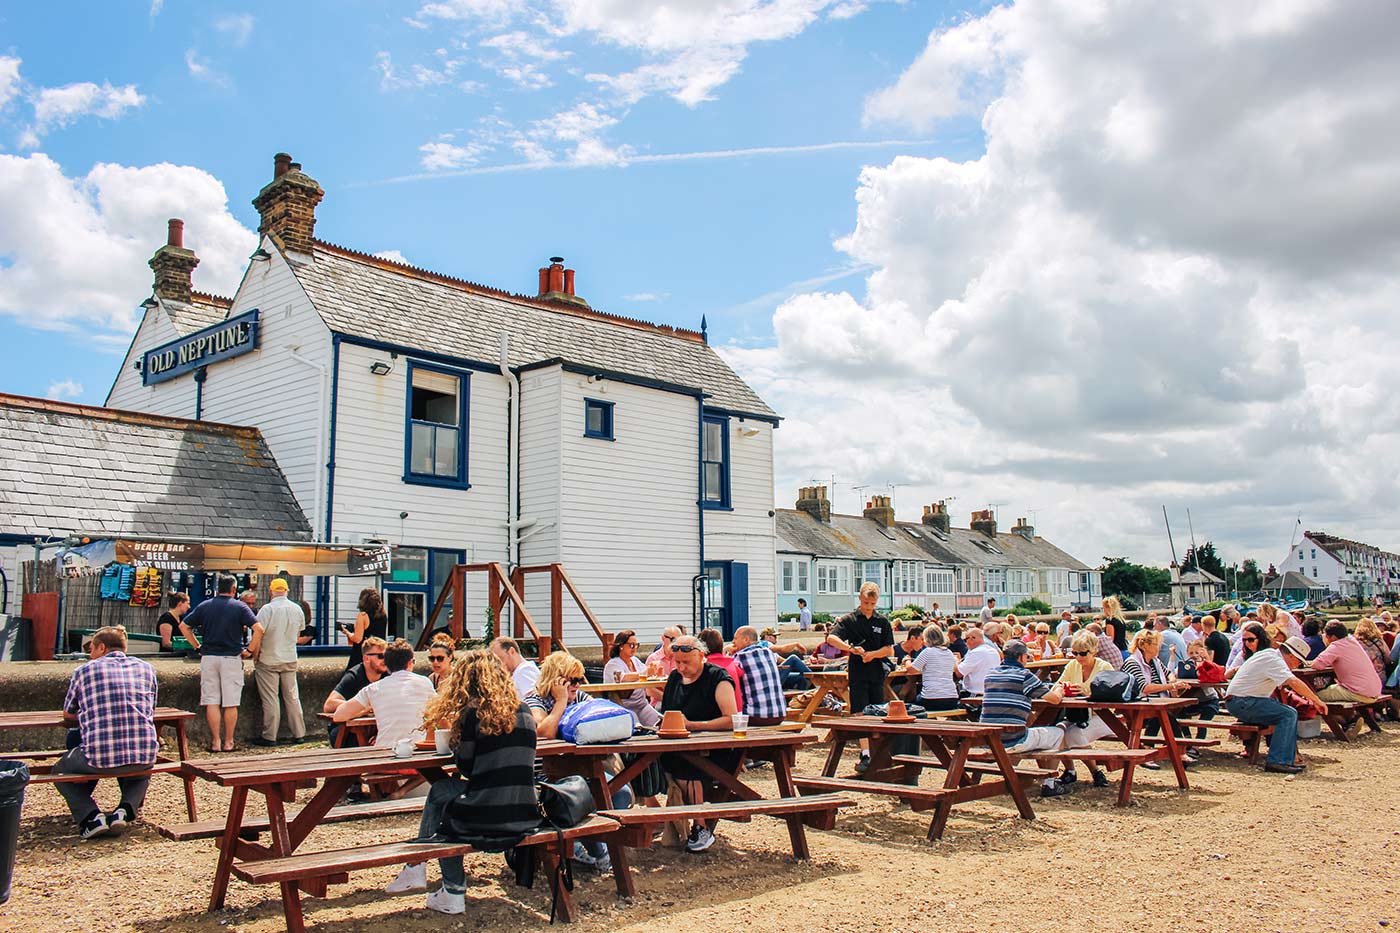 Old Neptune pub | Things to do in Whitstable - a day trip from London blog post